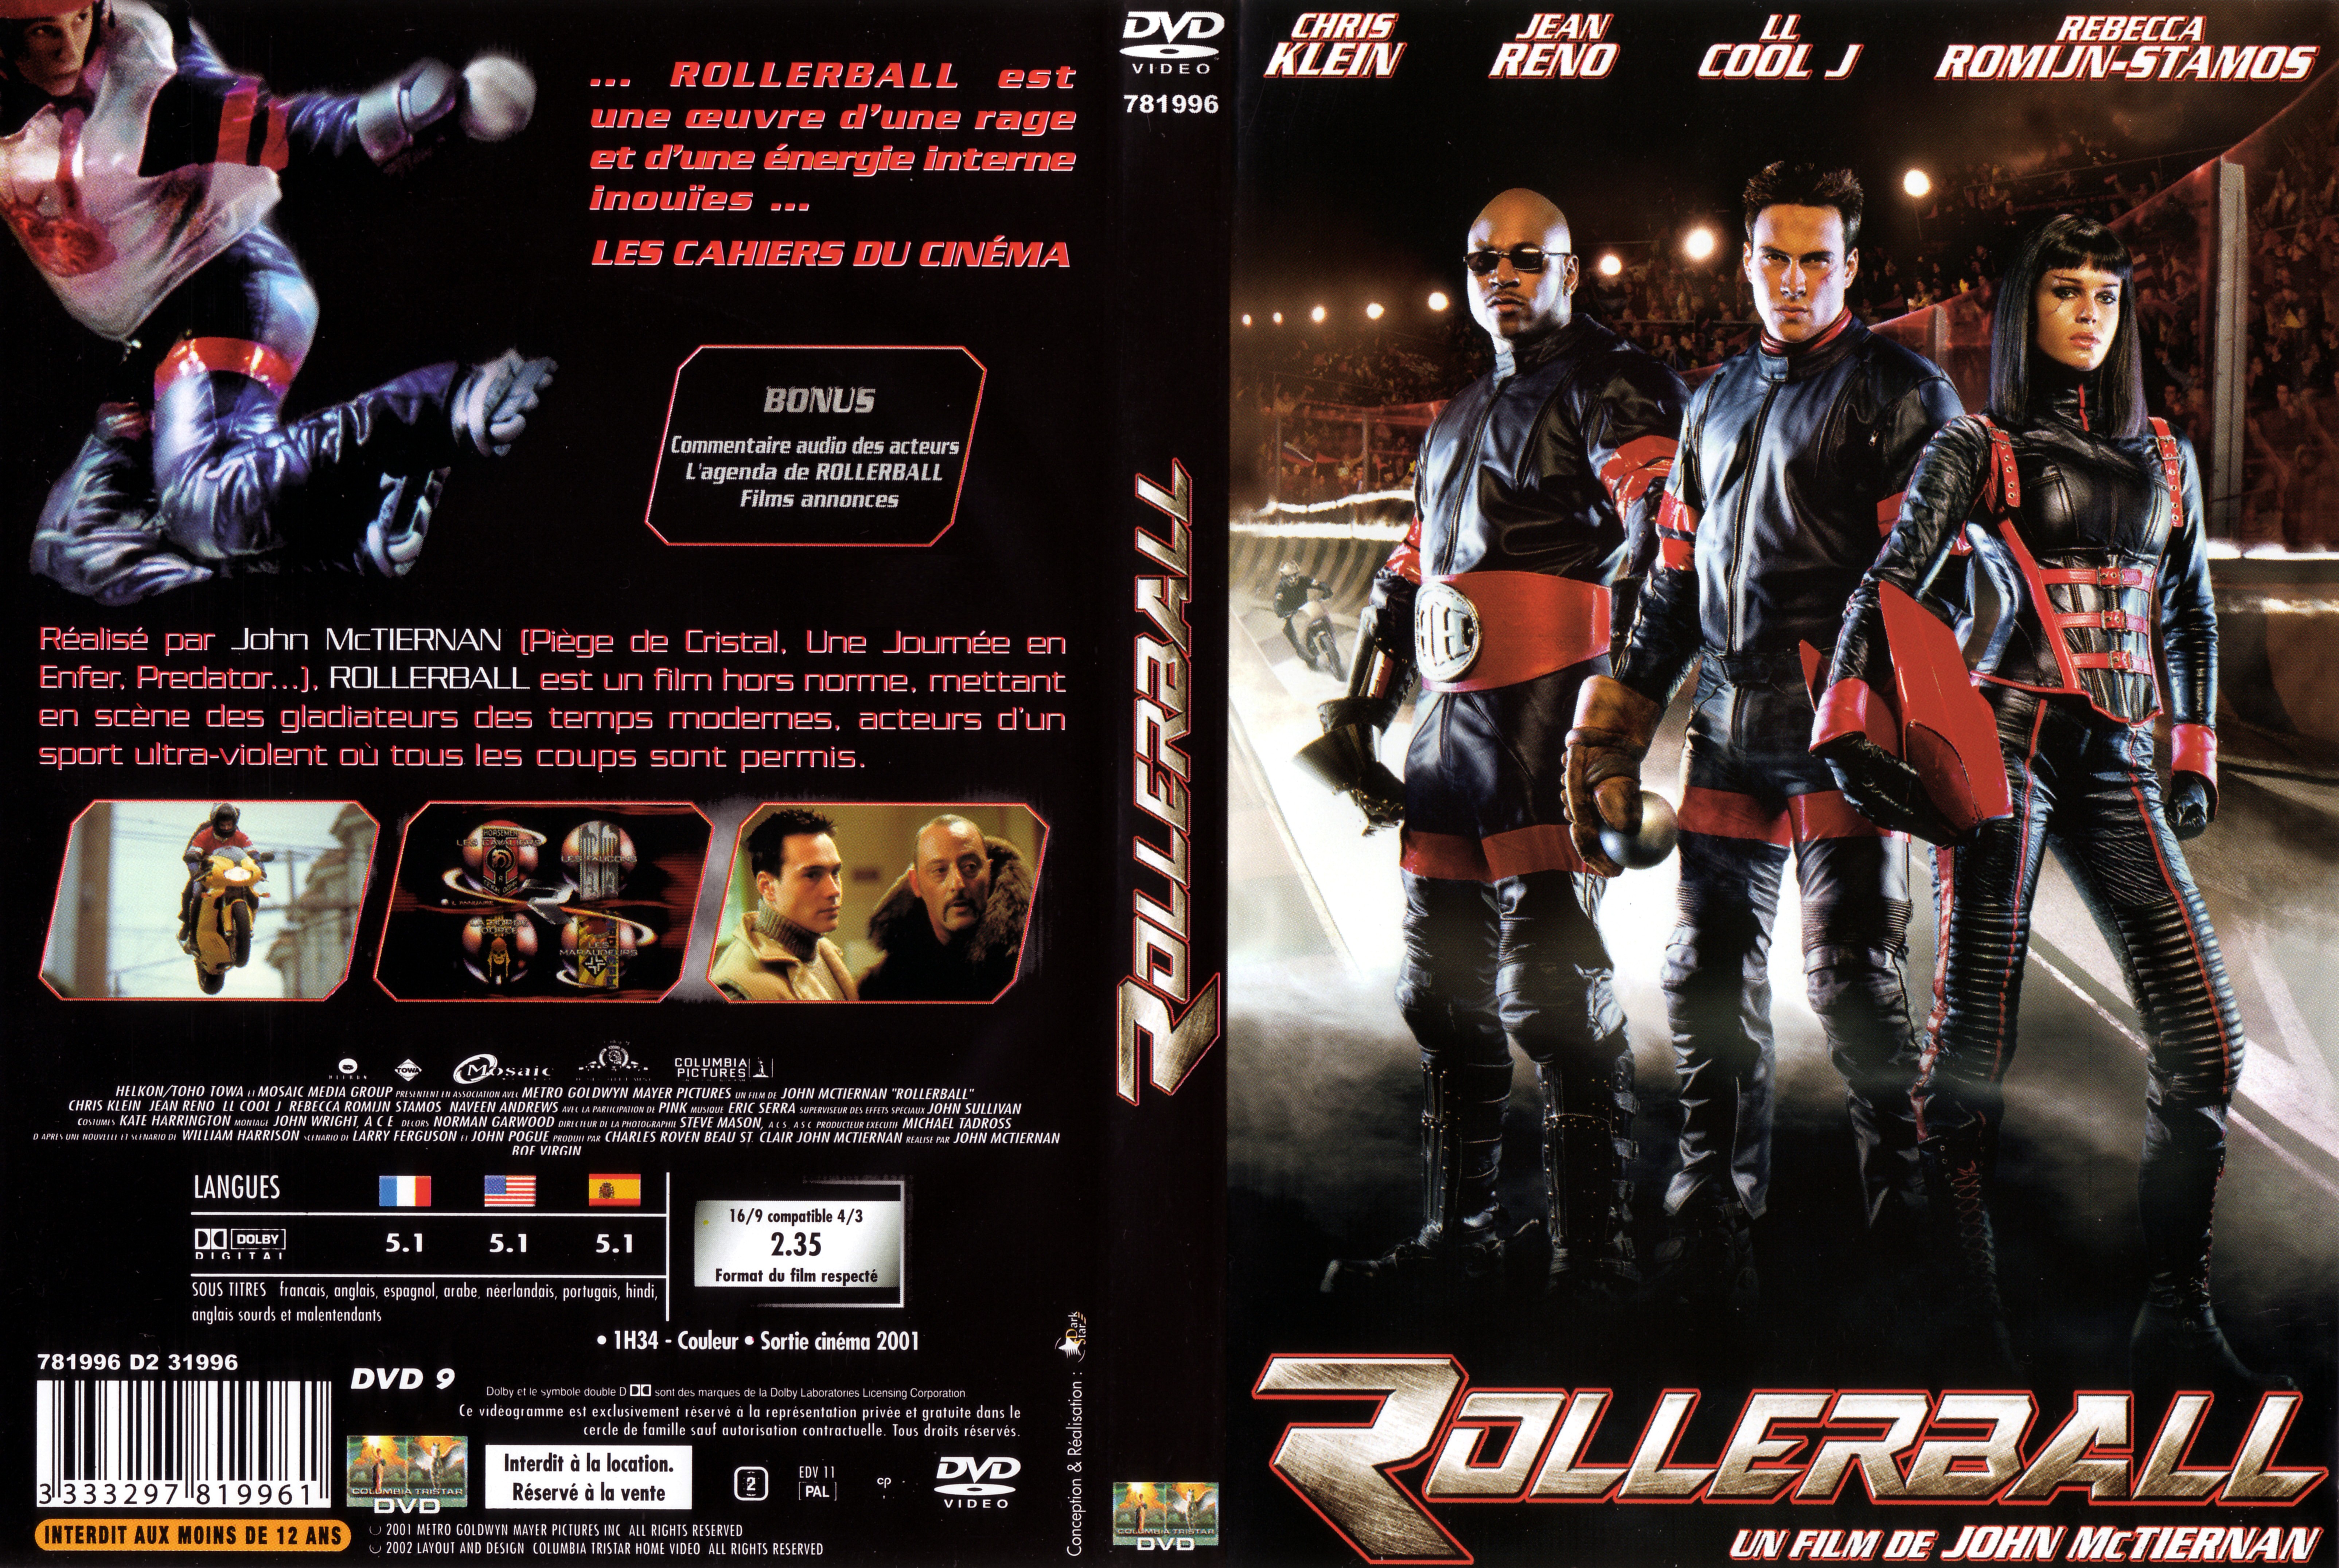 Jaquette DVD Rollerball (2002)